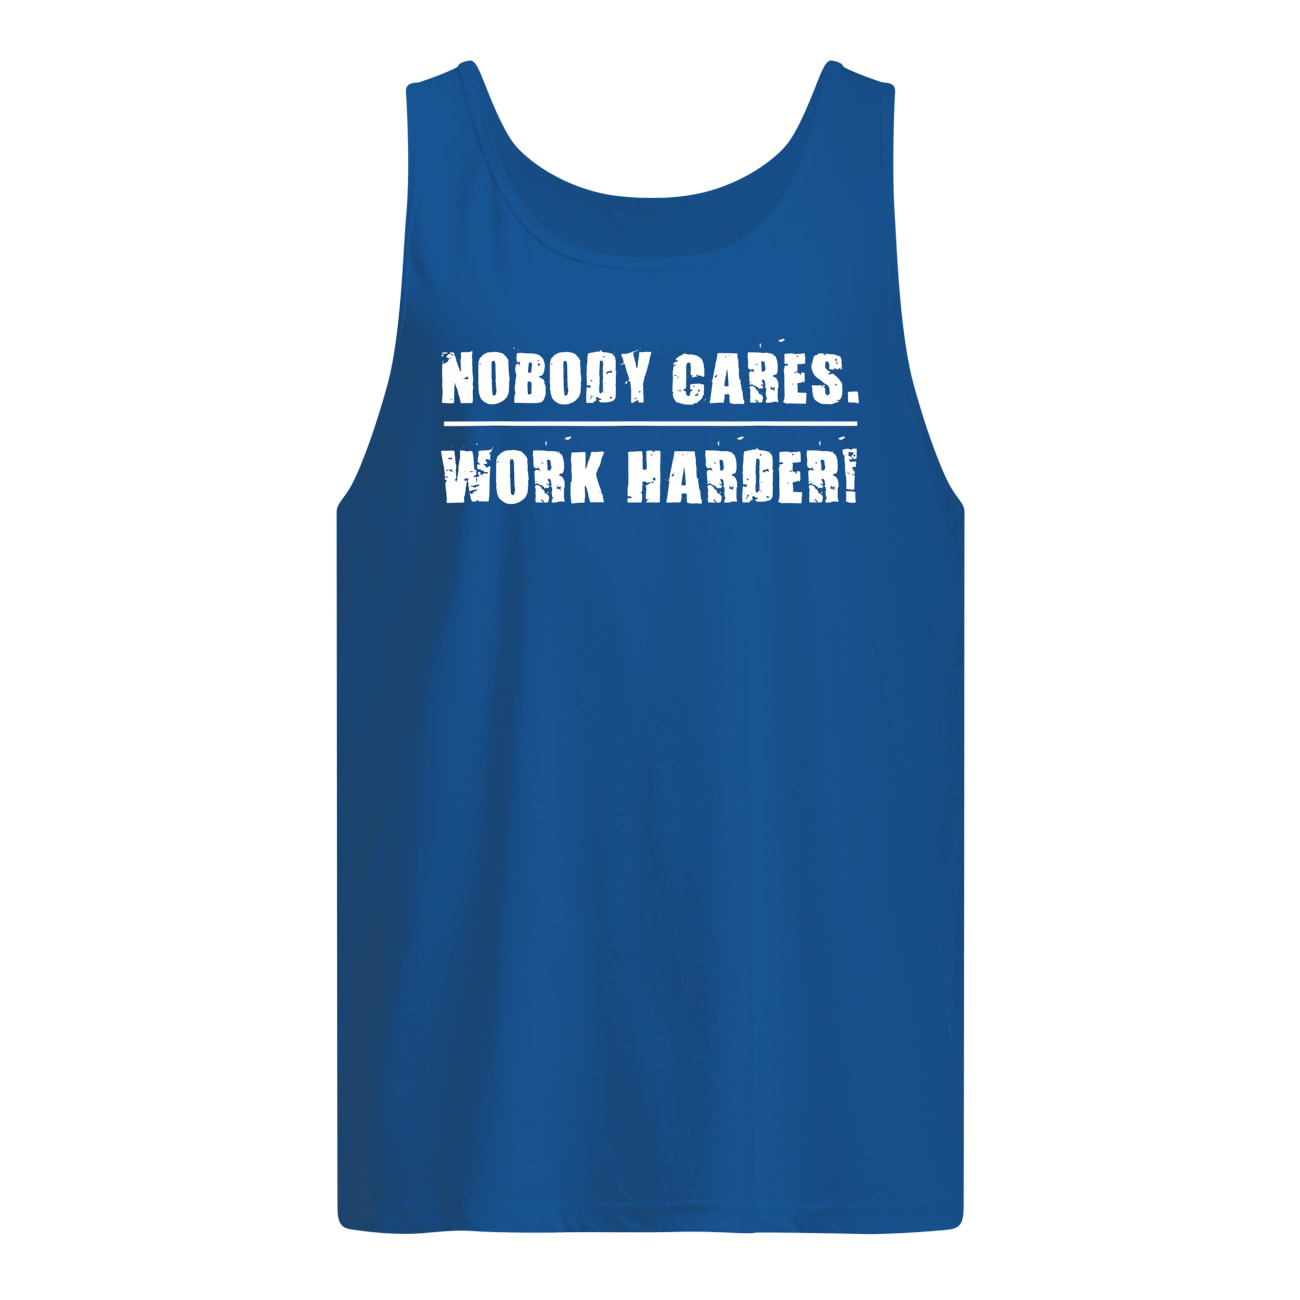 Nobody cares work harder motivational fitness workout gym tank top